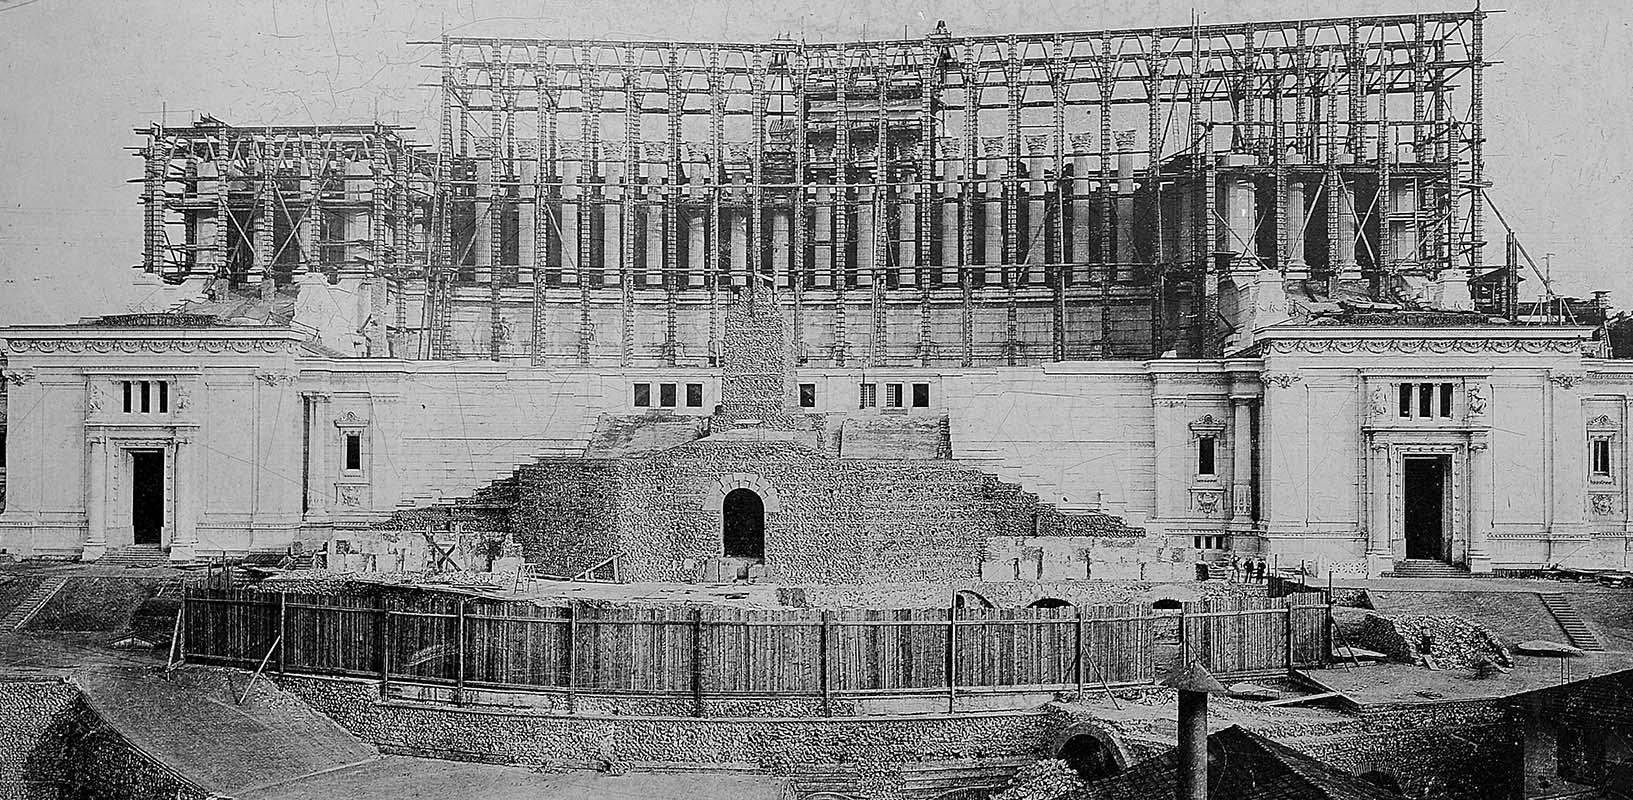 Construction of the Vittoriano under way in 1906
